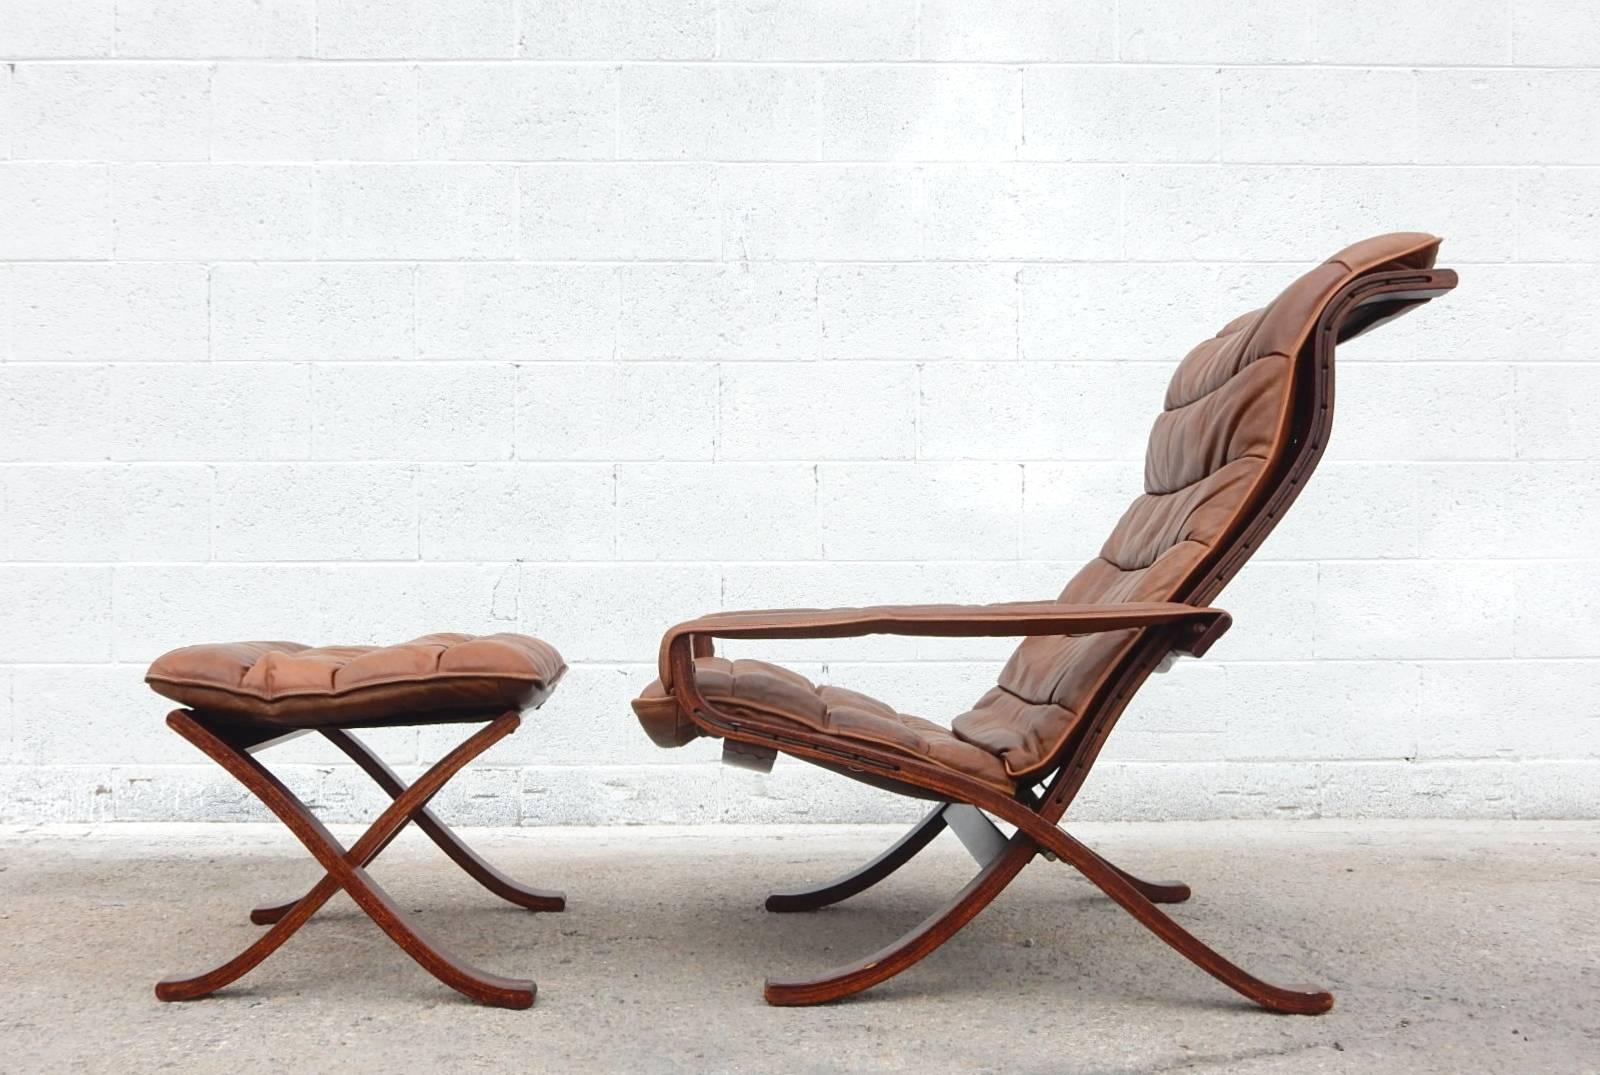 A pair of Ingmar Relling design for Westnofa Siesta leather lounge chairs plus ottoman.
Campaign style with folding frame and leather strap arms. Tall back,
Light brown leather cushions and rosewood finish on sculpted teak frames.
Exceptionally